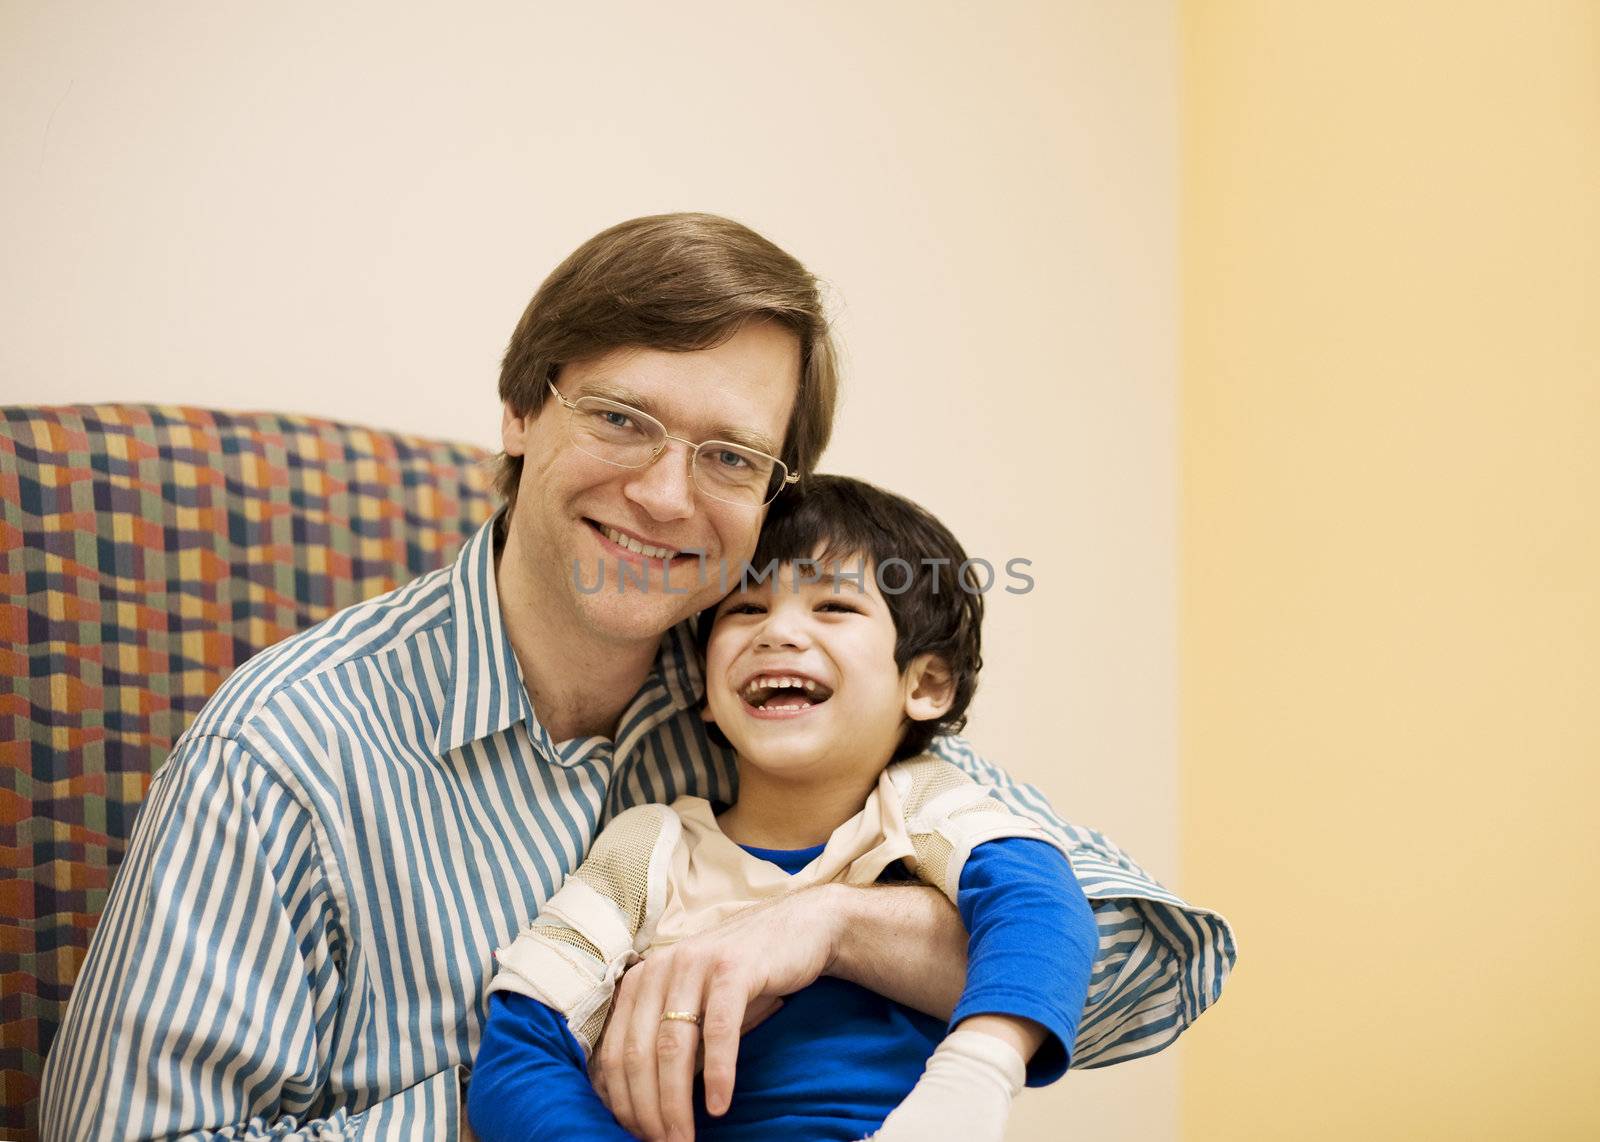 Father holding disabled son in doctor's office by jarenwicklund